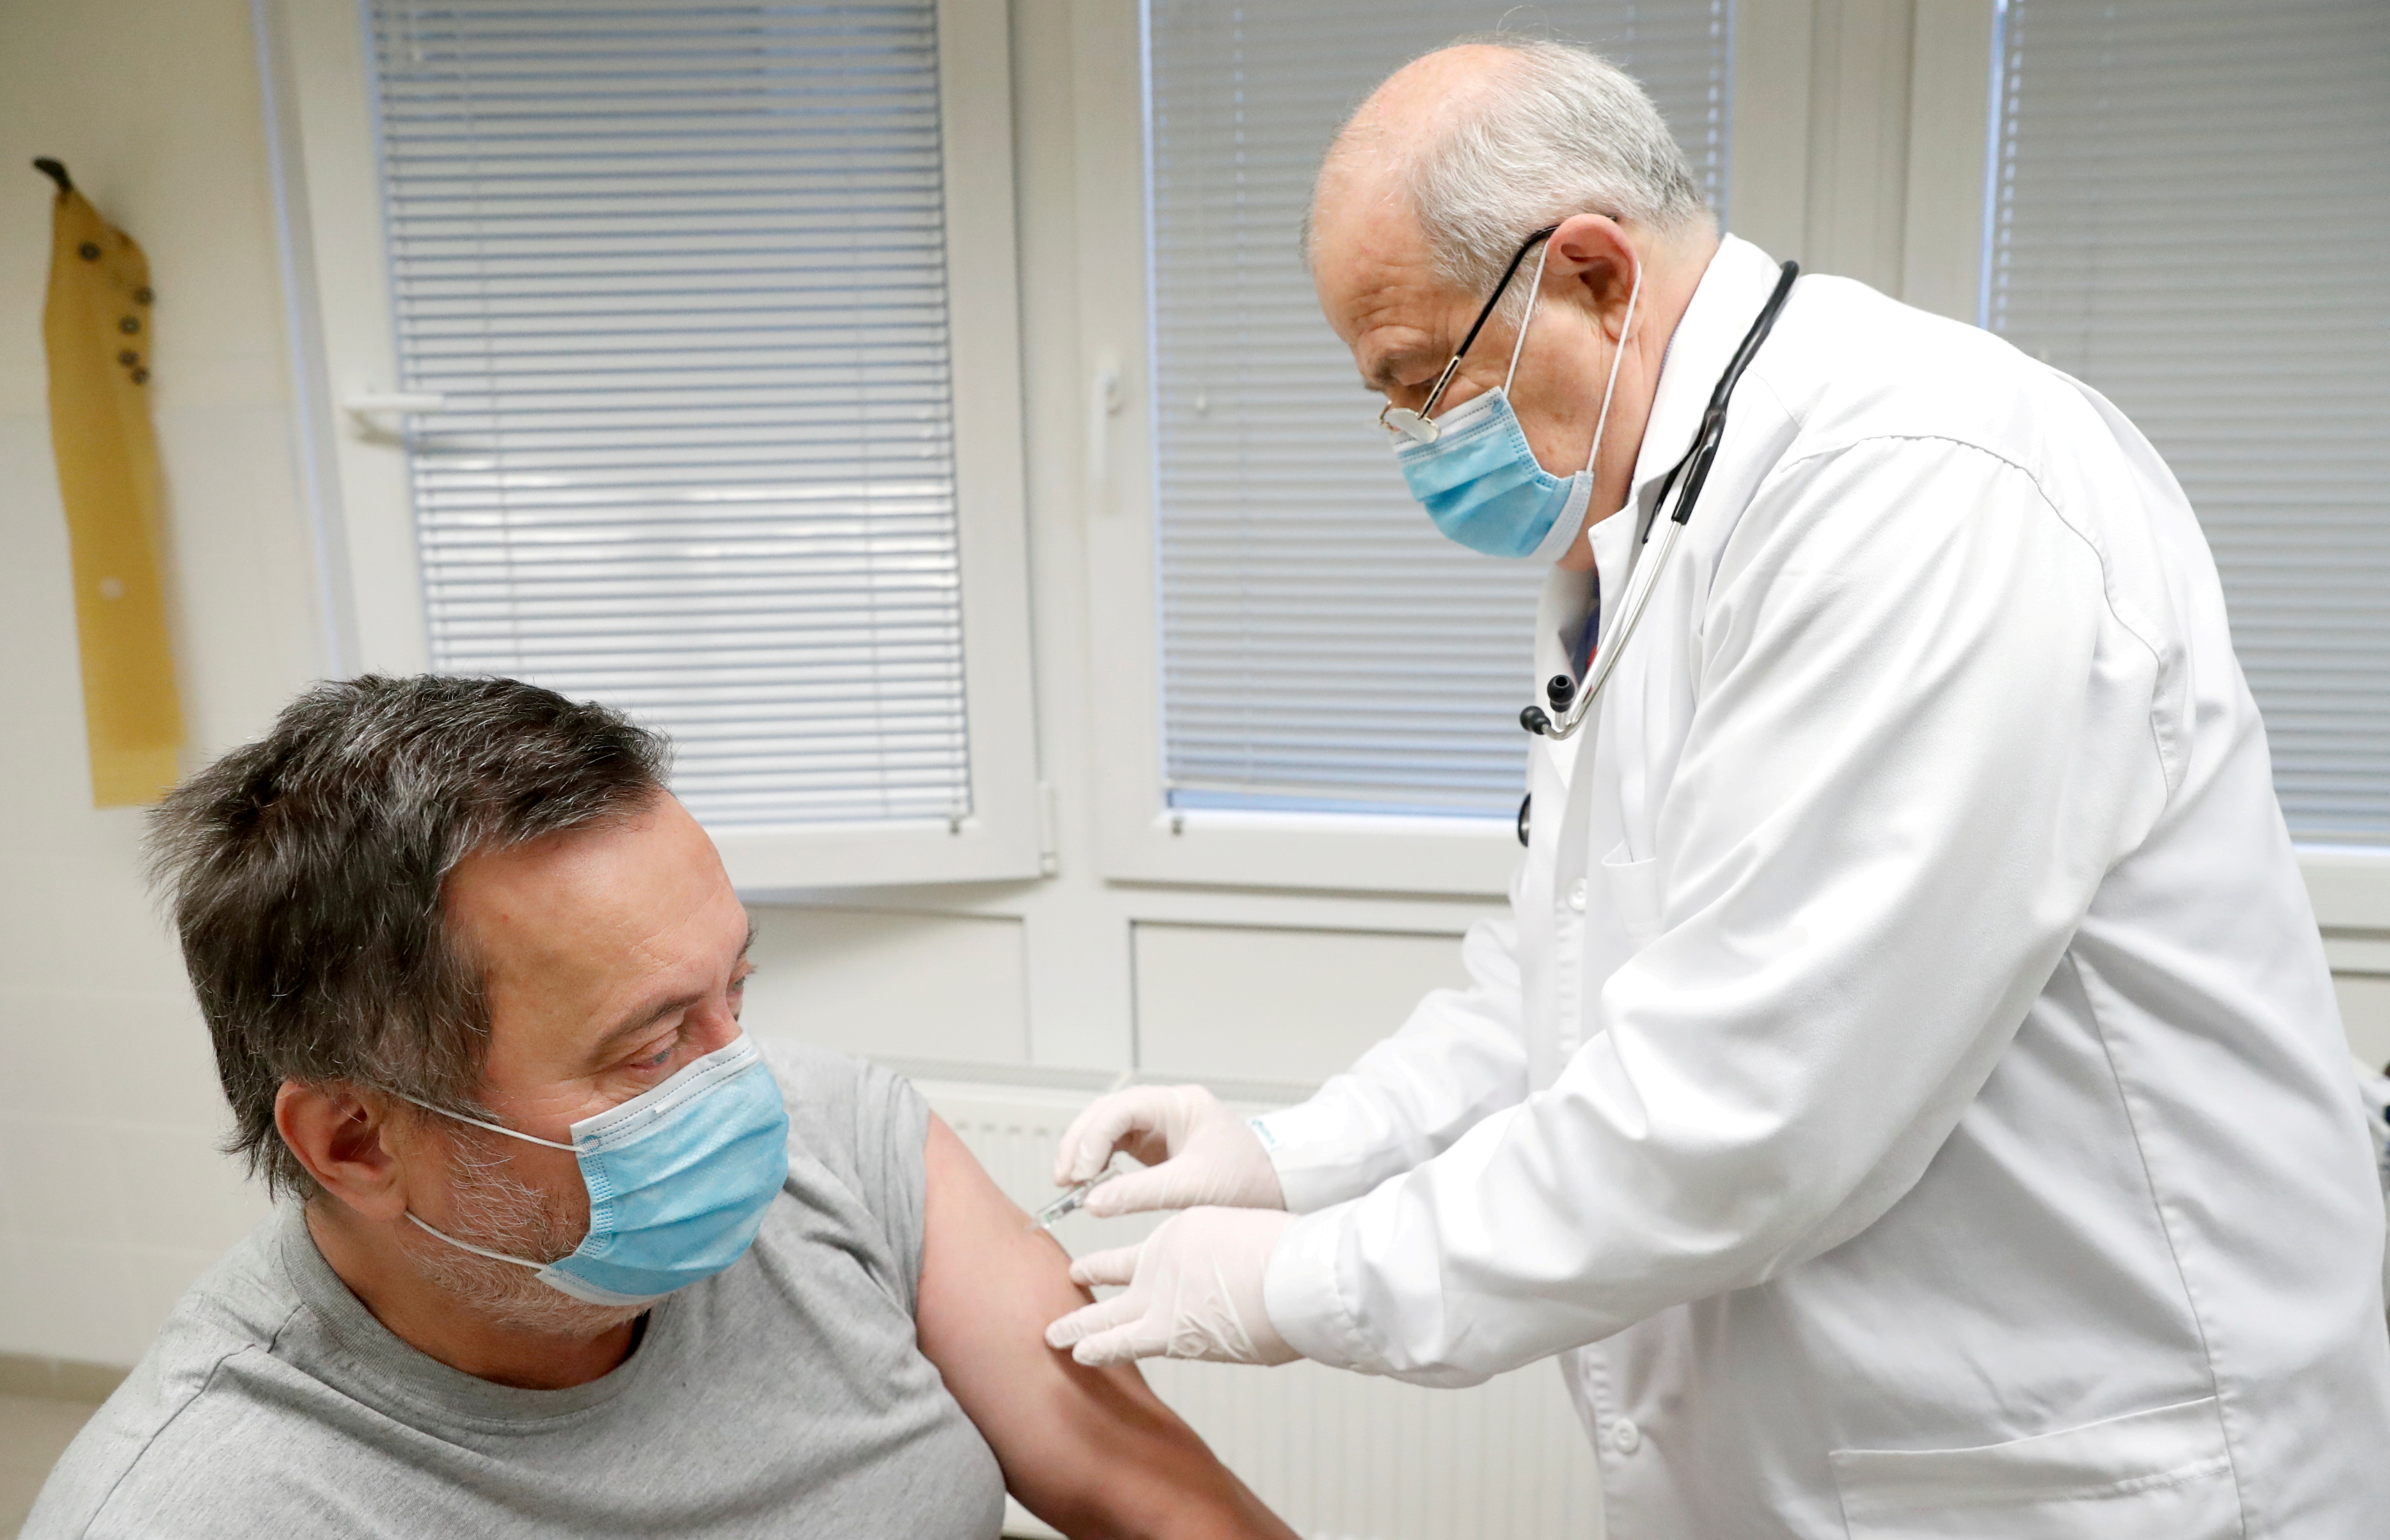 Family doctor Csaba Denes gives a dose of the Sinopharm coronavirus disease (COVID-19) vaccine to a patient, in Budapest, Hungary February 26, 2021.